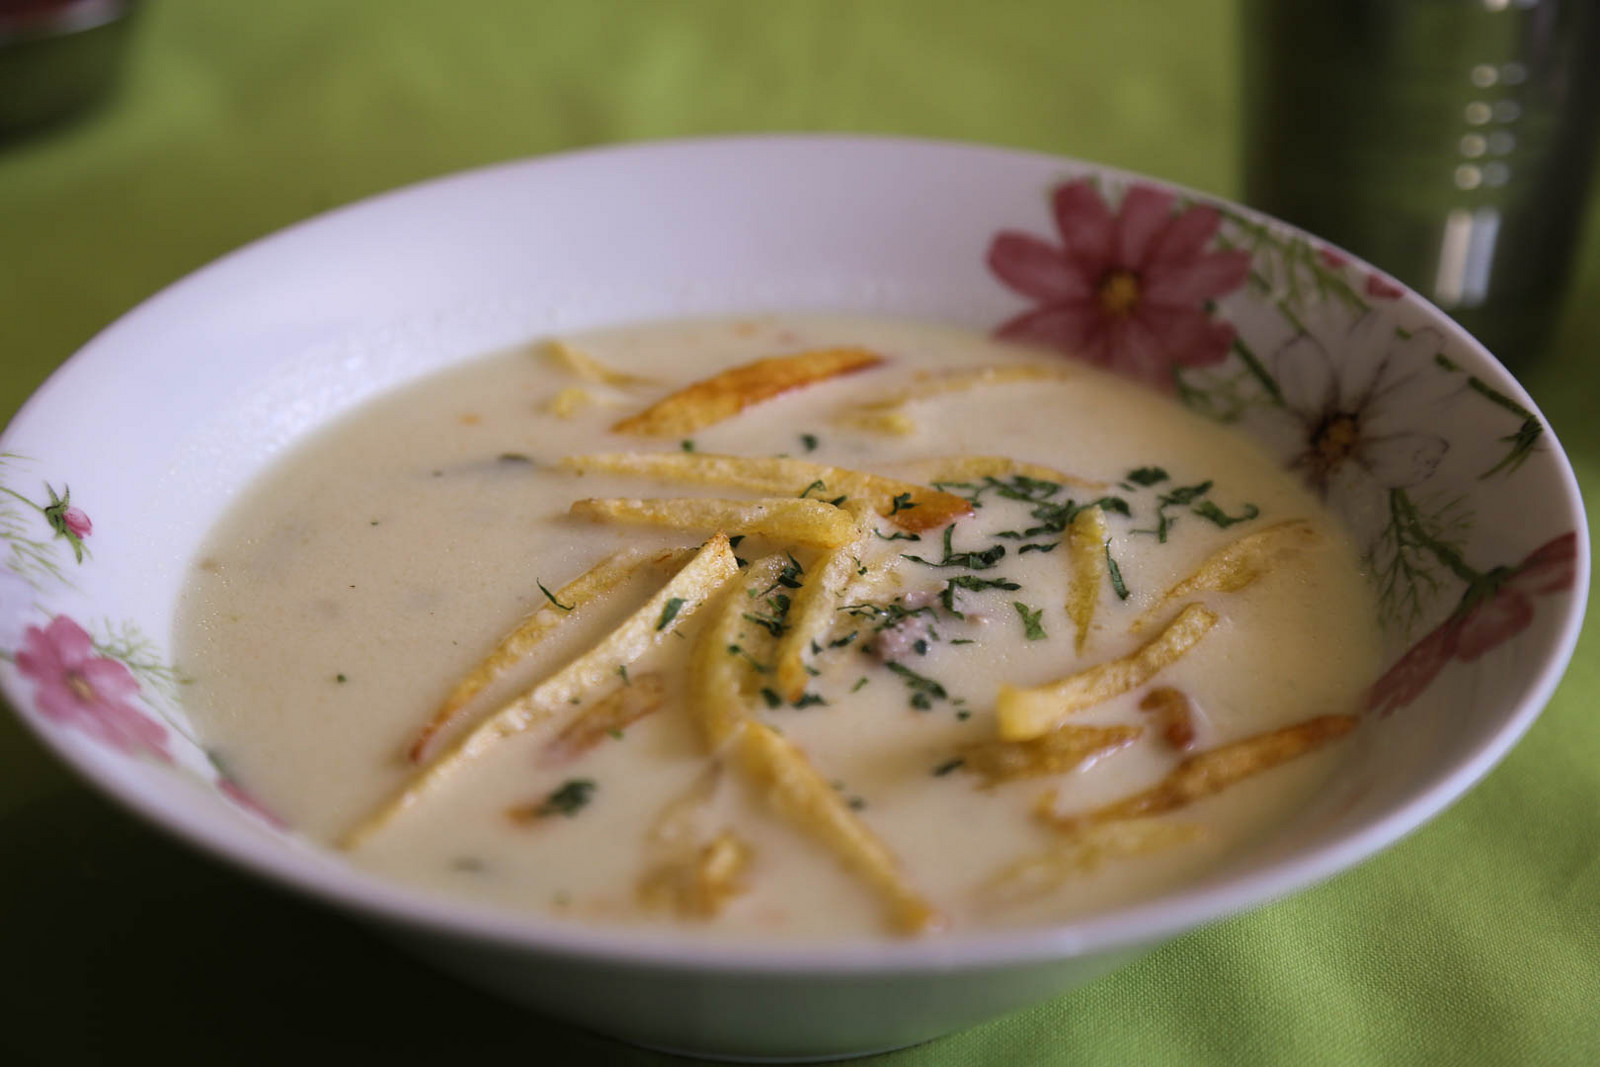   Sopa de maní  (peanut soup), a nourishing broth made from ground peanuts, has a garnish of fried matchstick potatoes. 